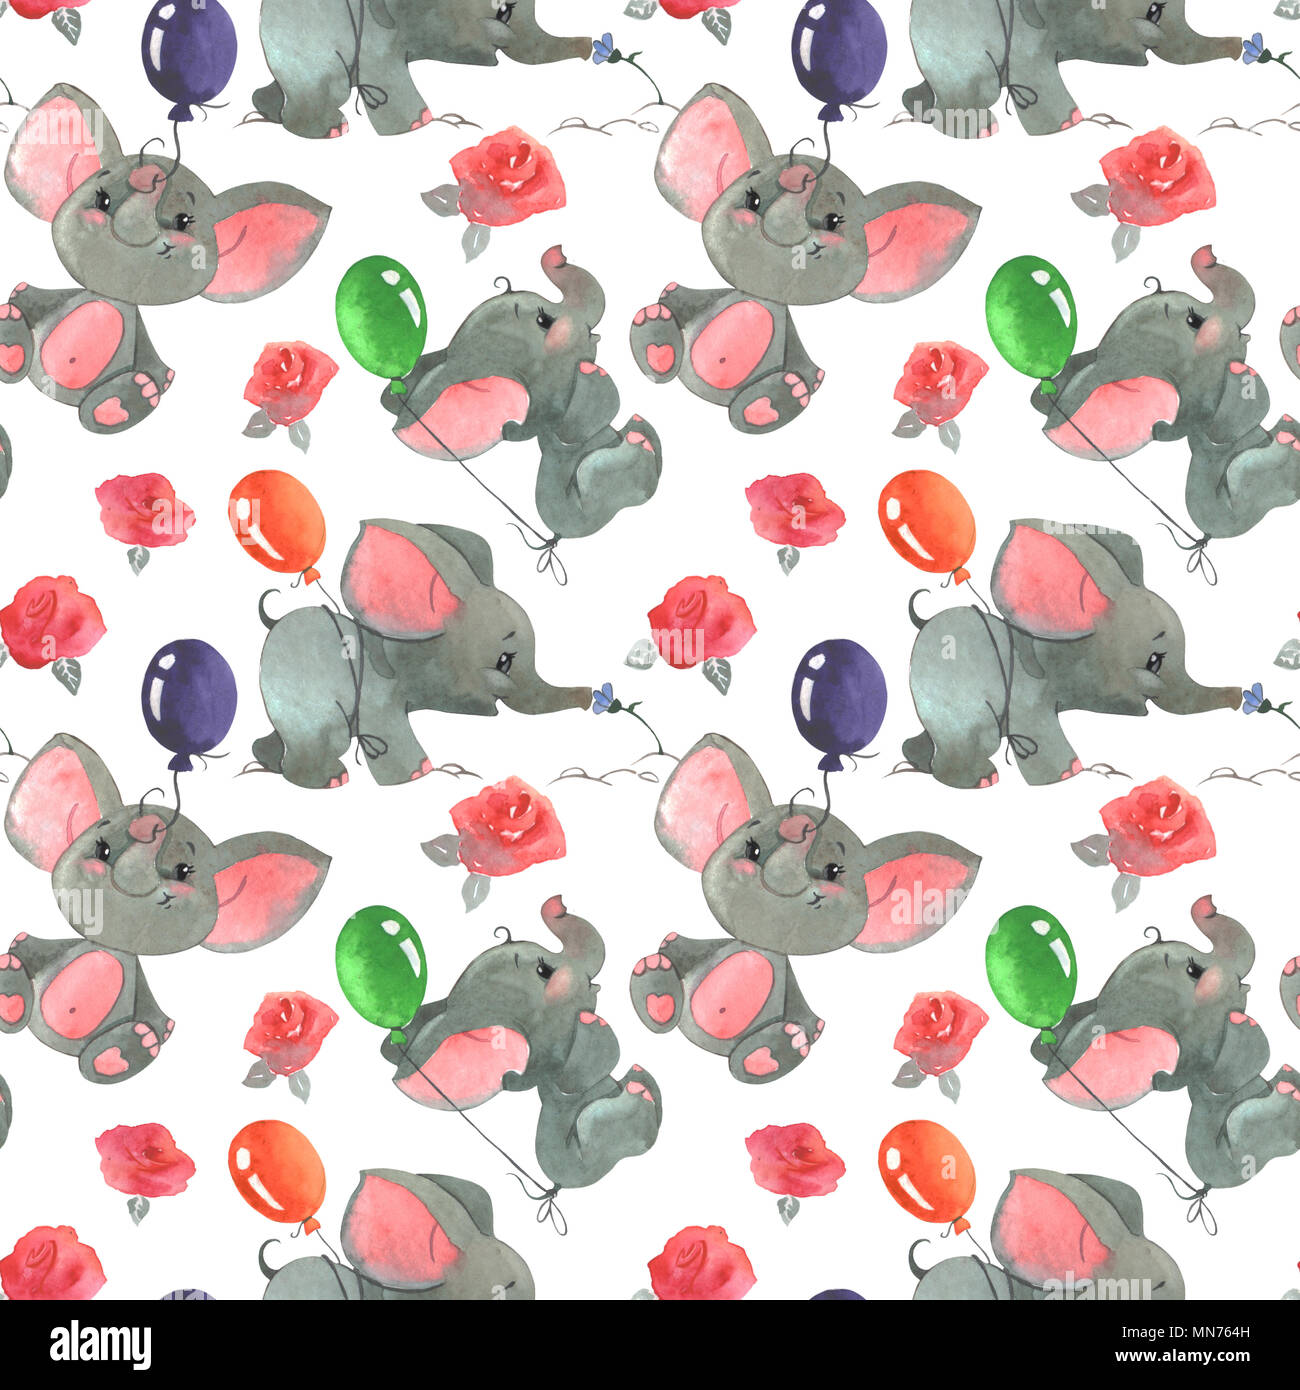 Roses flowers and buds with cute elephants with baloons seamless pattern background Stock Photo